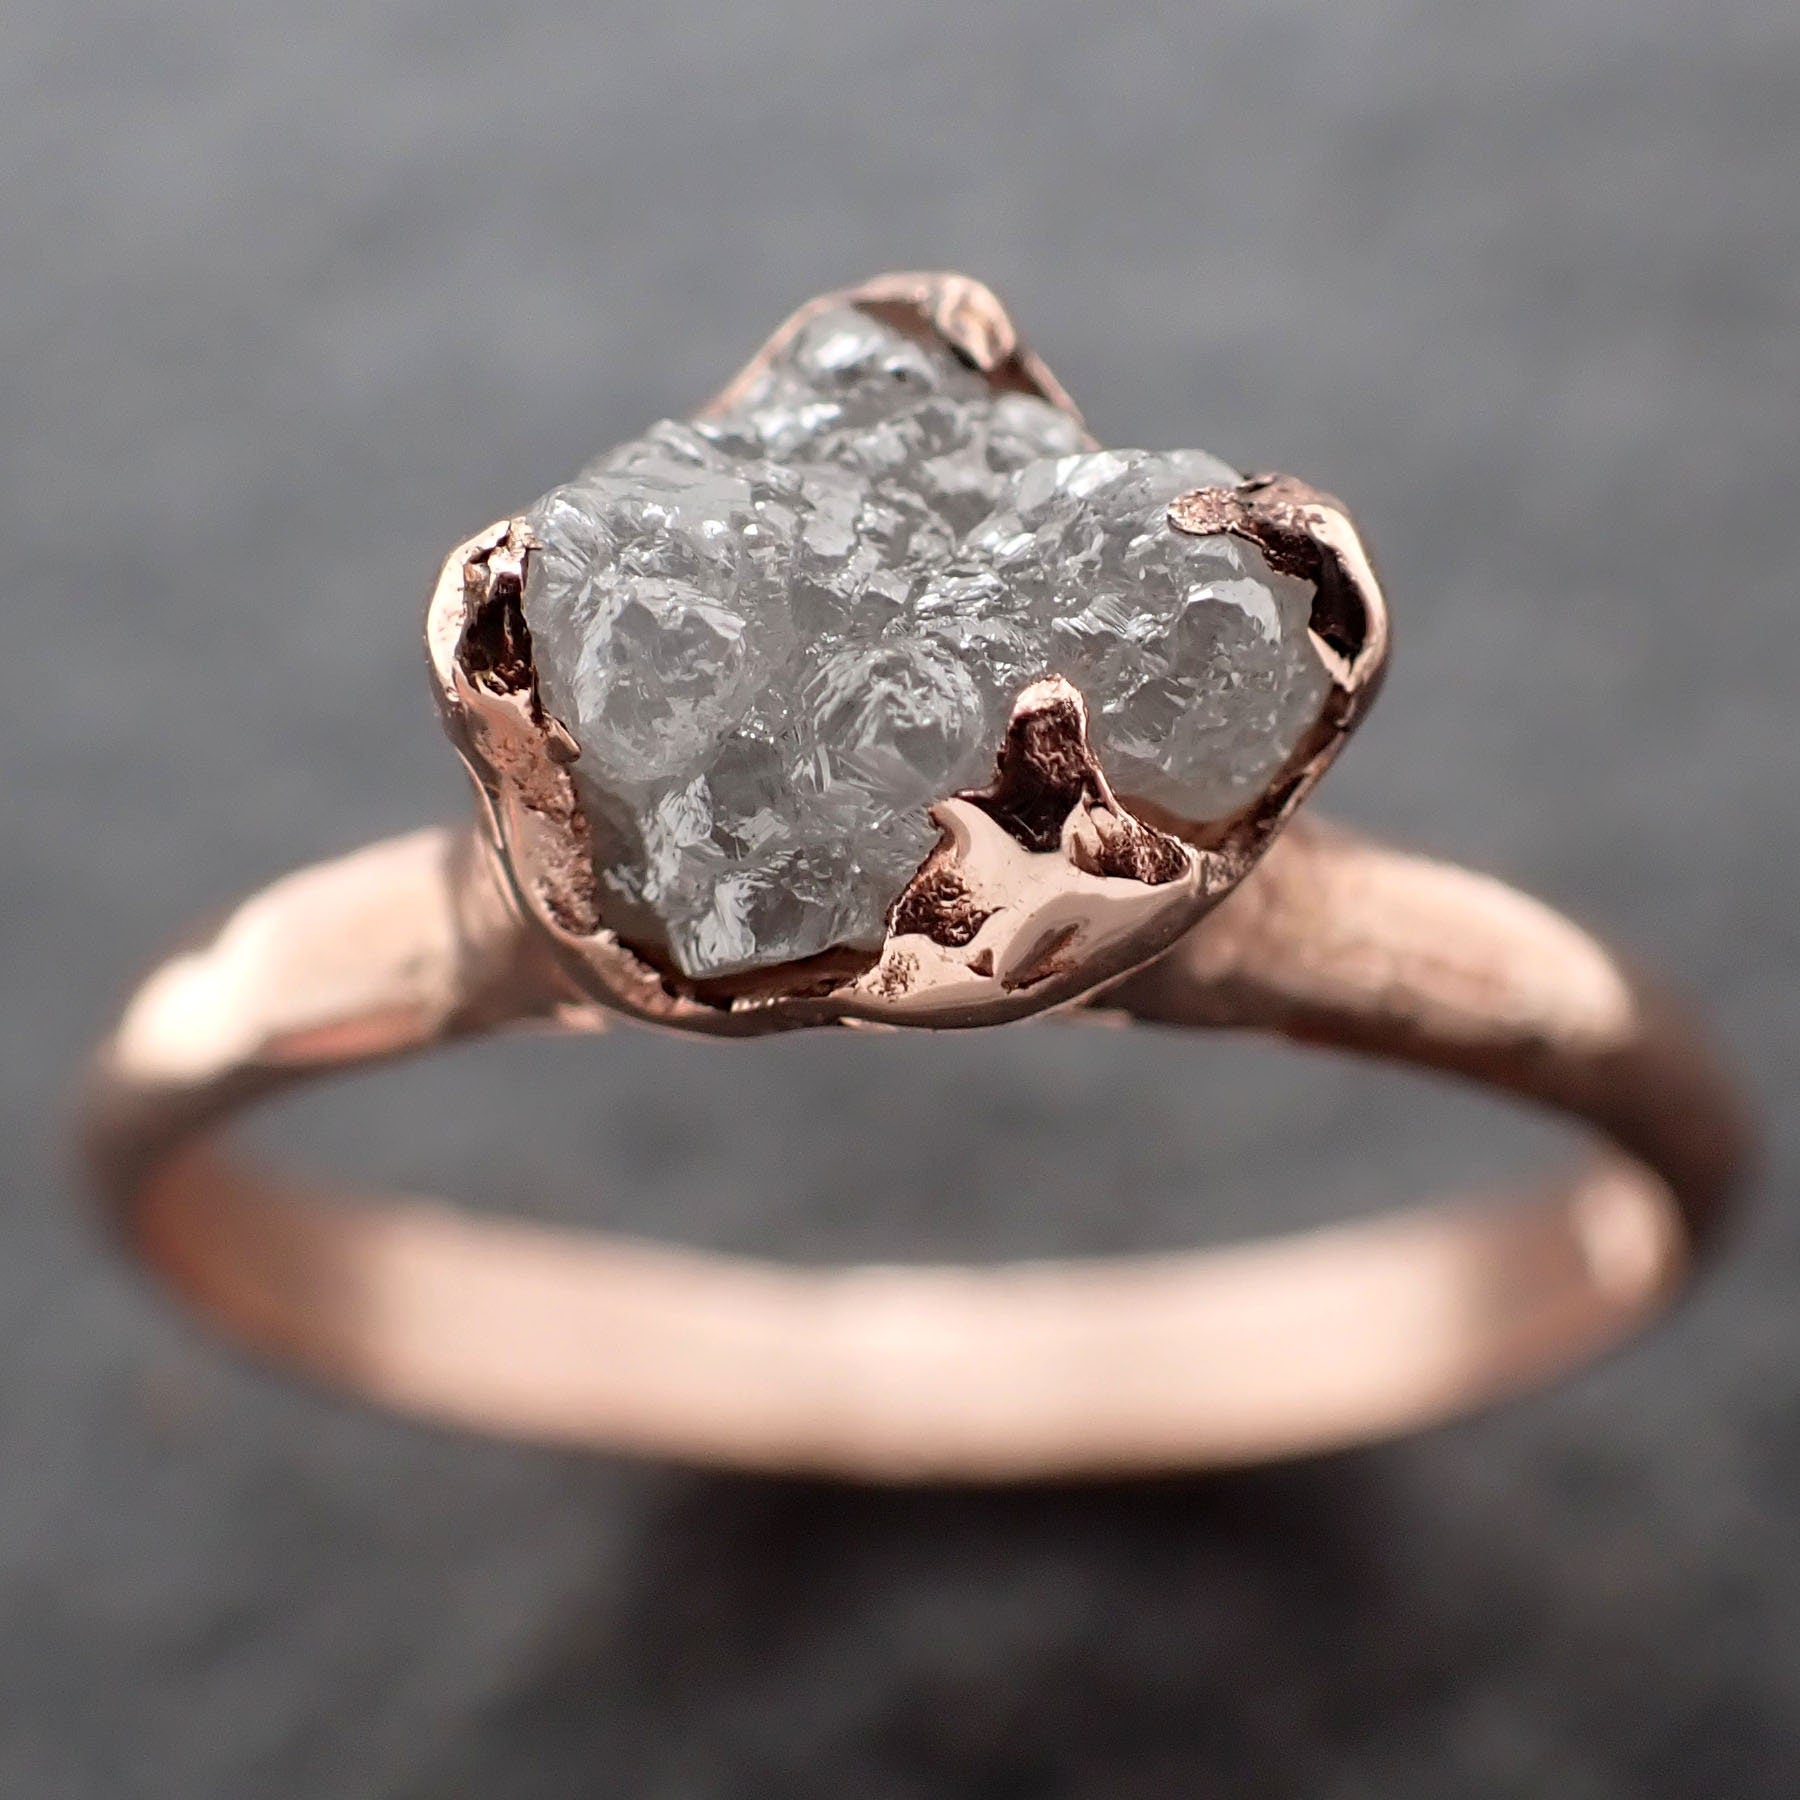 Raw Diamond Engagement Ring Rough Uncut Diamond Solitaire Recycled 14k Rose gold Conflict Free Diamond Wedding Promise 3111